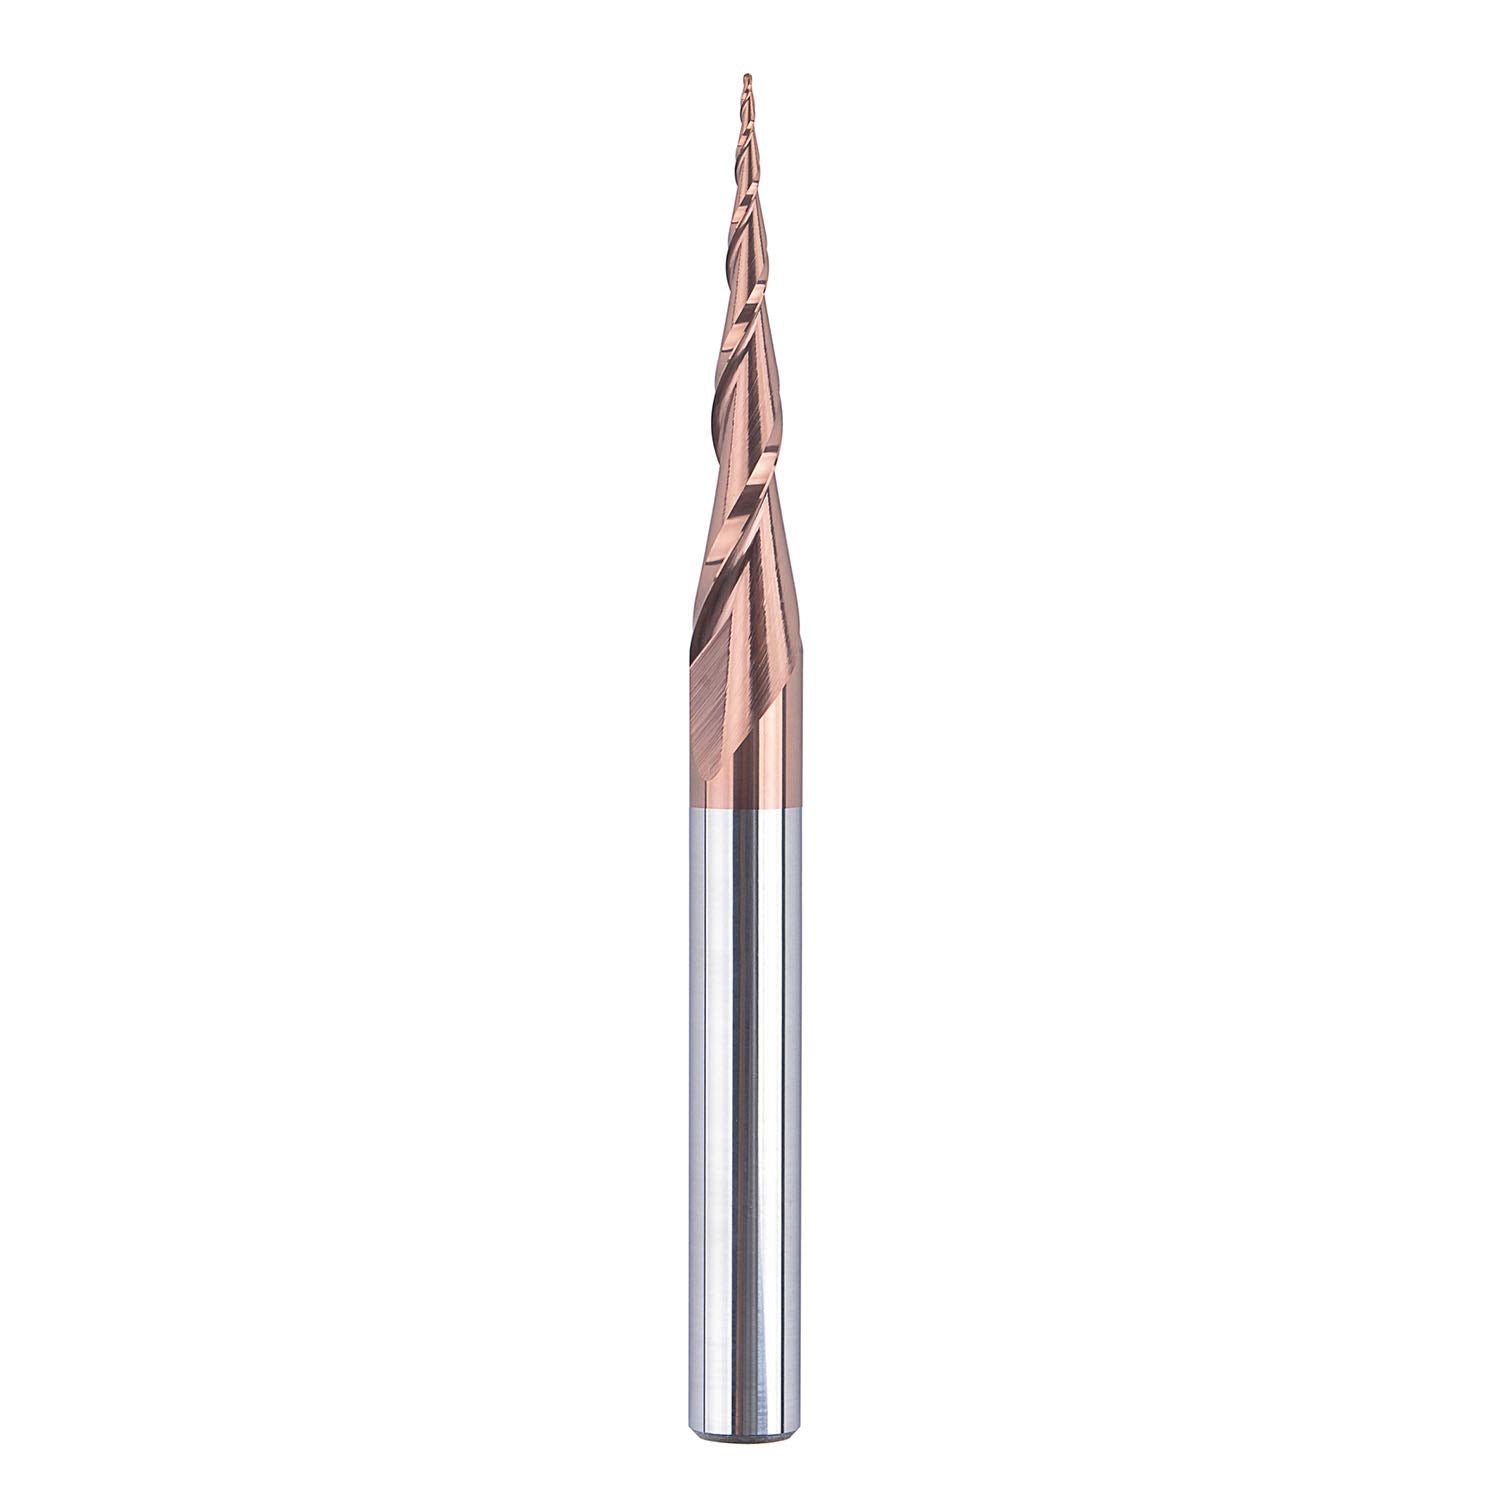 SpeTool W01005 CNC 2D and 3D Carving 5.26 Deg Tapered Angle Ball Nose 0.25mm Radius x 1/4" Shank x 1-1/4" Cutting Length x 3" Long 2 Flute SC H-Si Coated Upcut Router Bit